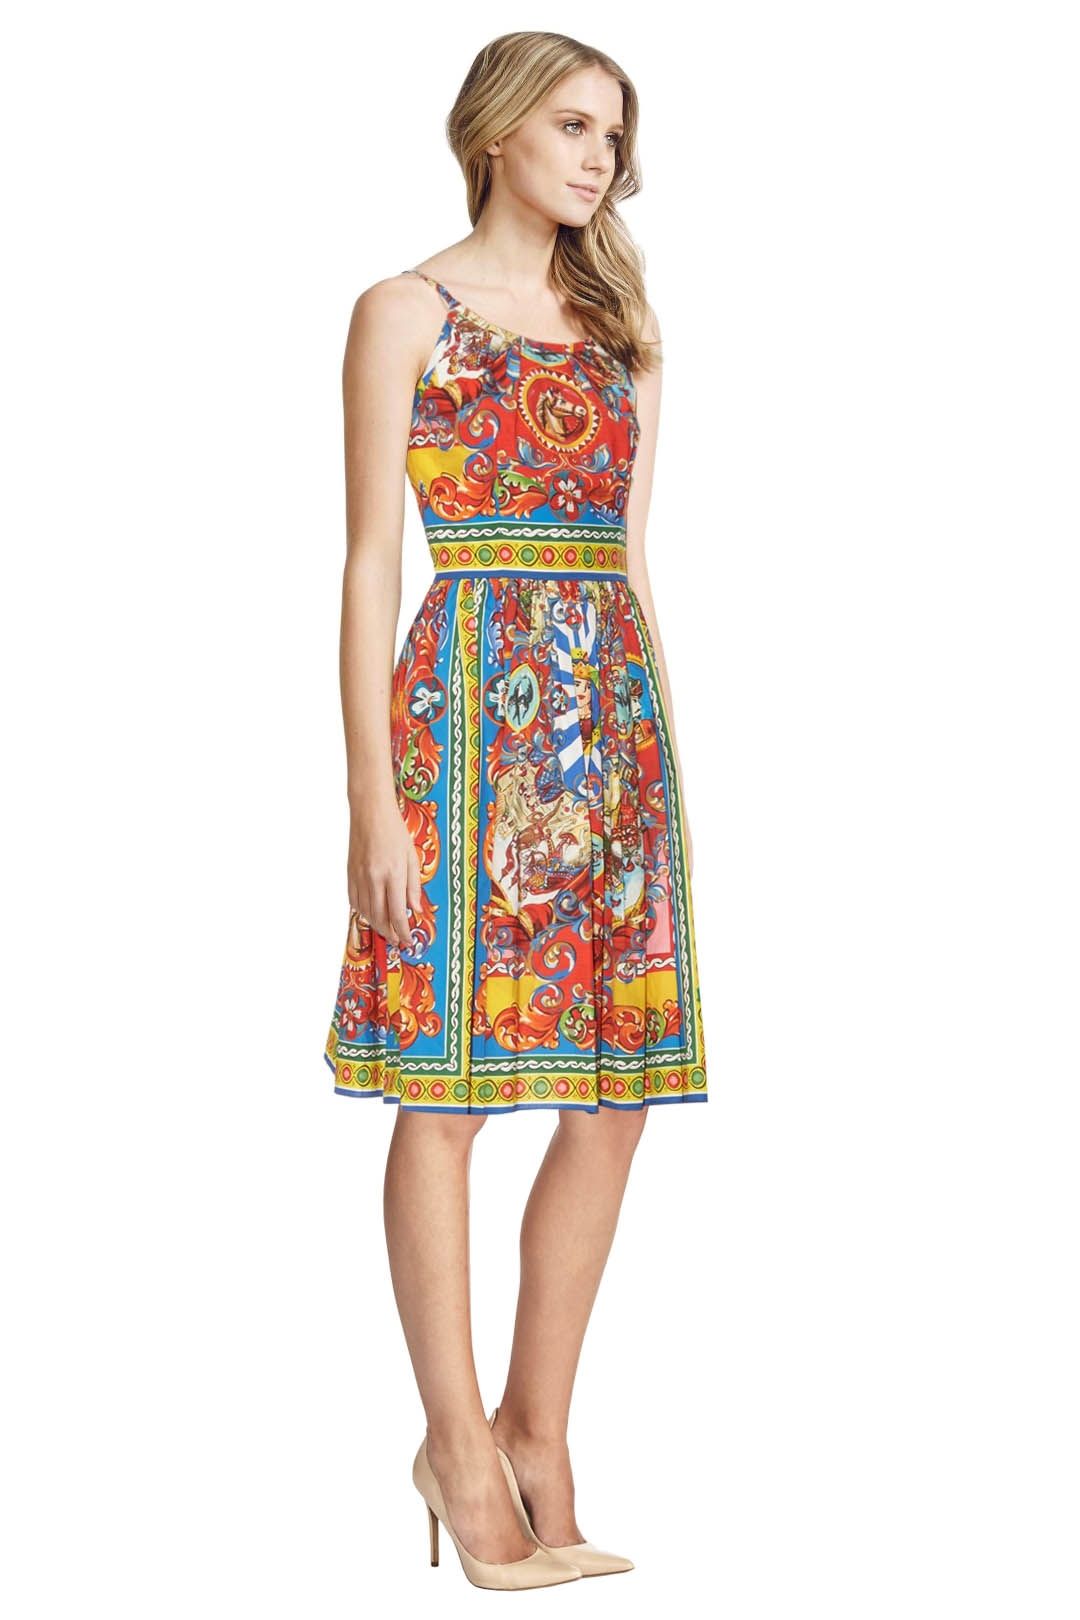 dolce and gabbana womens dresses